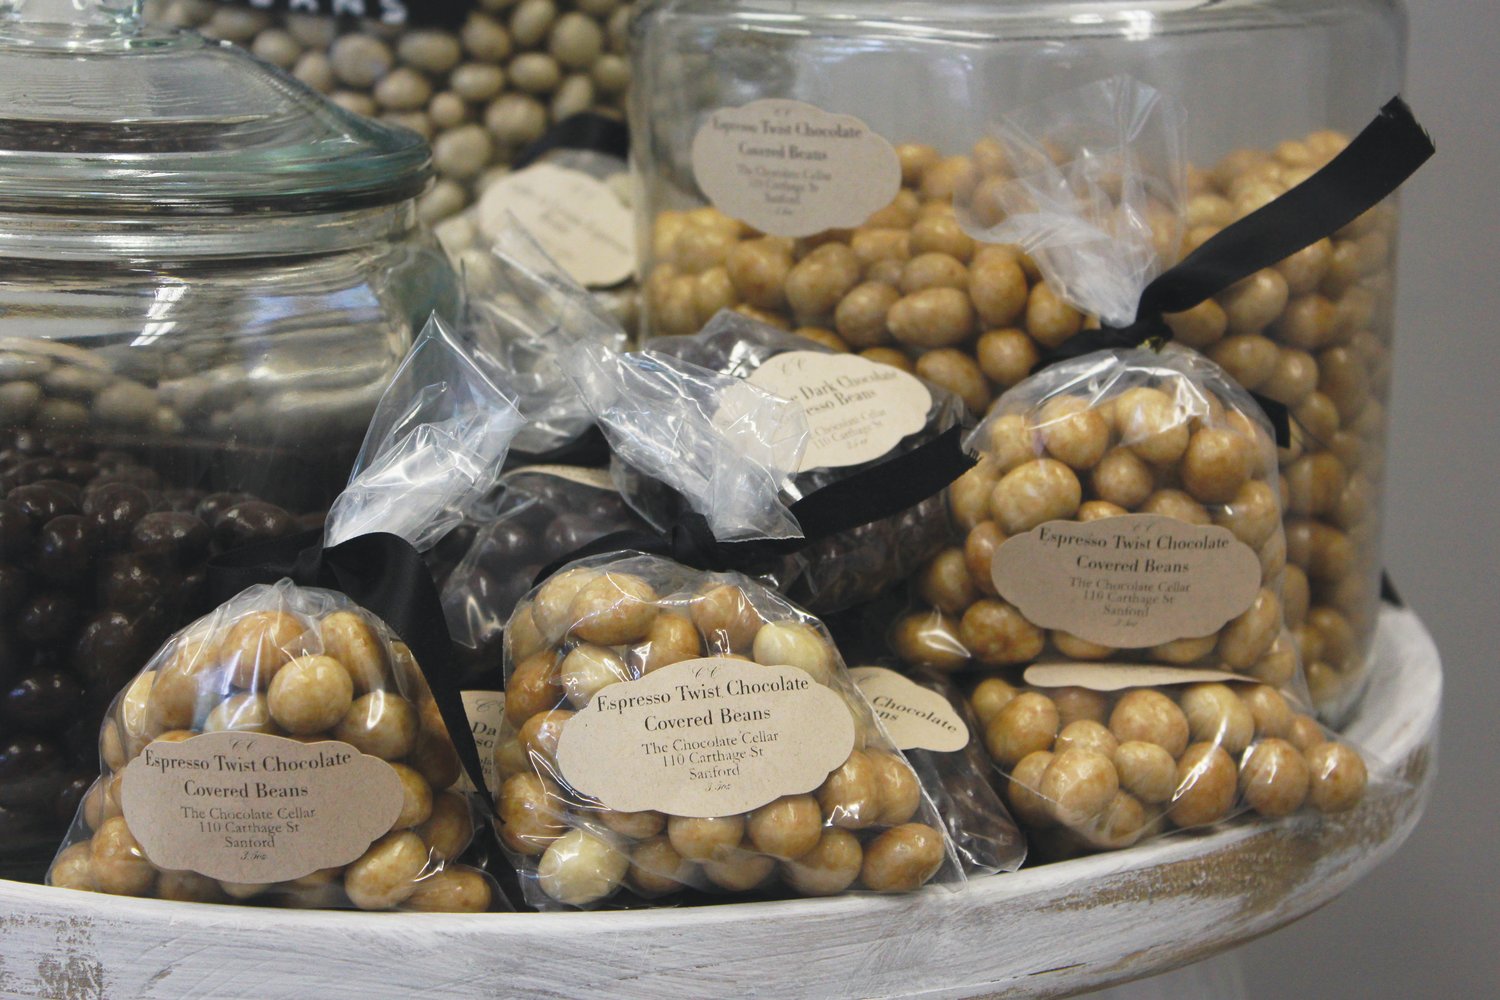 Dark chocolate and esspreso twist chocolate covered beans are among the treats made by, and for sale at, Chocolate Cellar Deux in downtown Pittsboro. The shop occasionally puts out seasonal specials, such as July’s firecracker truffle, made with pop rocks.